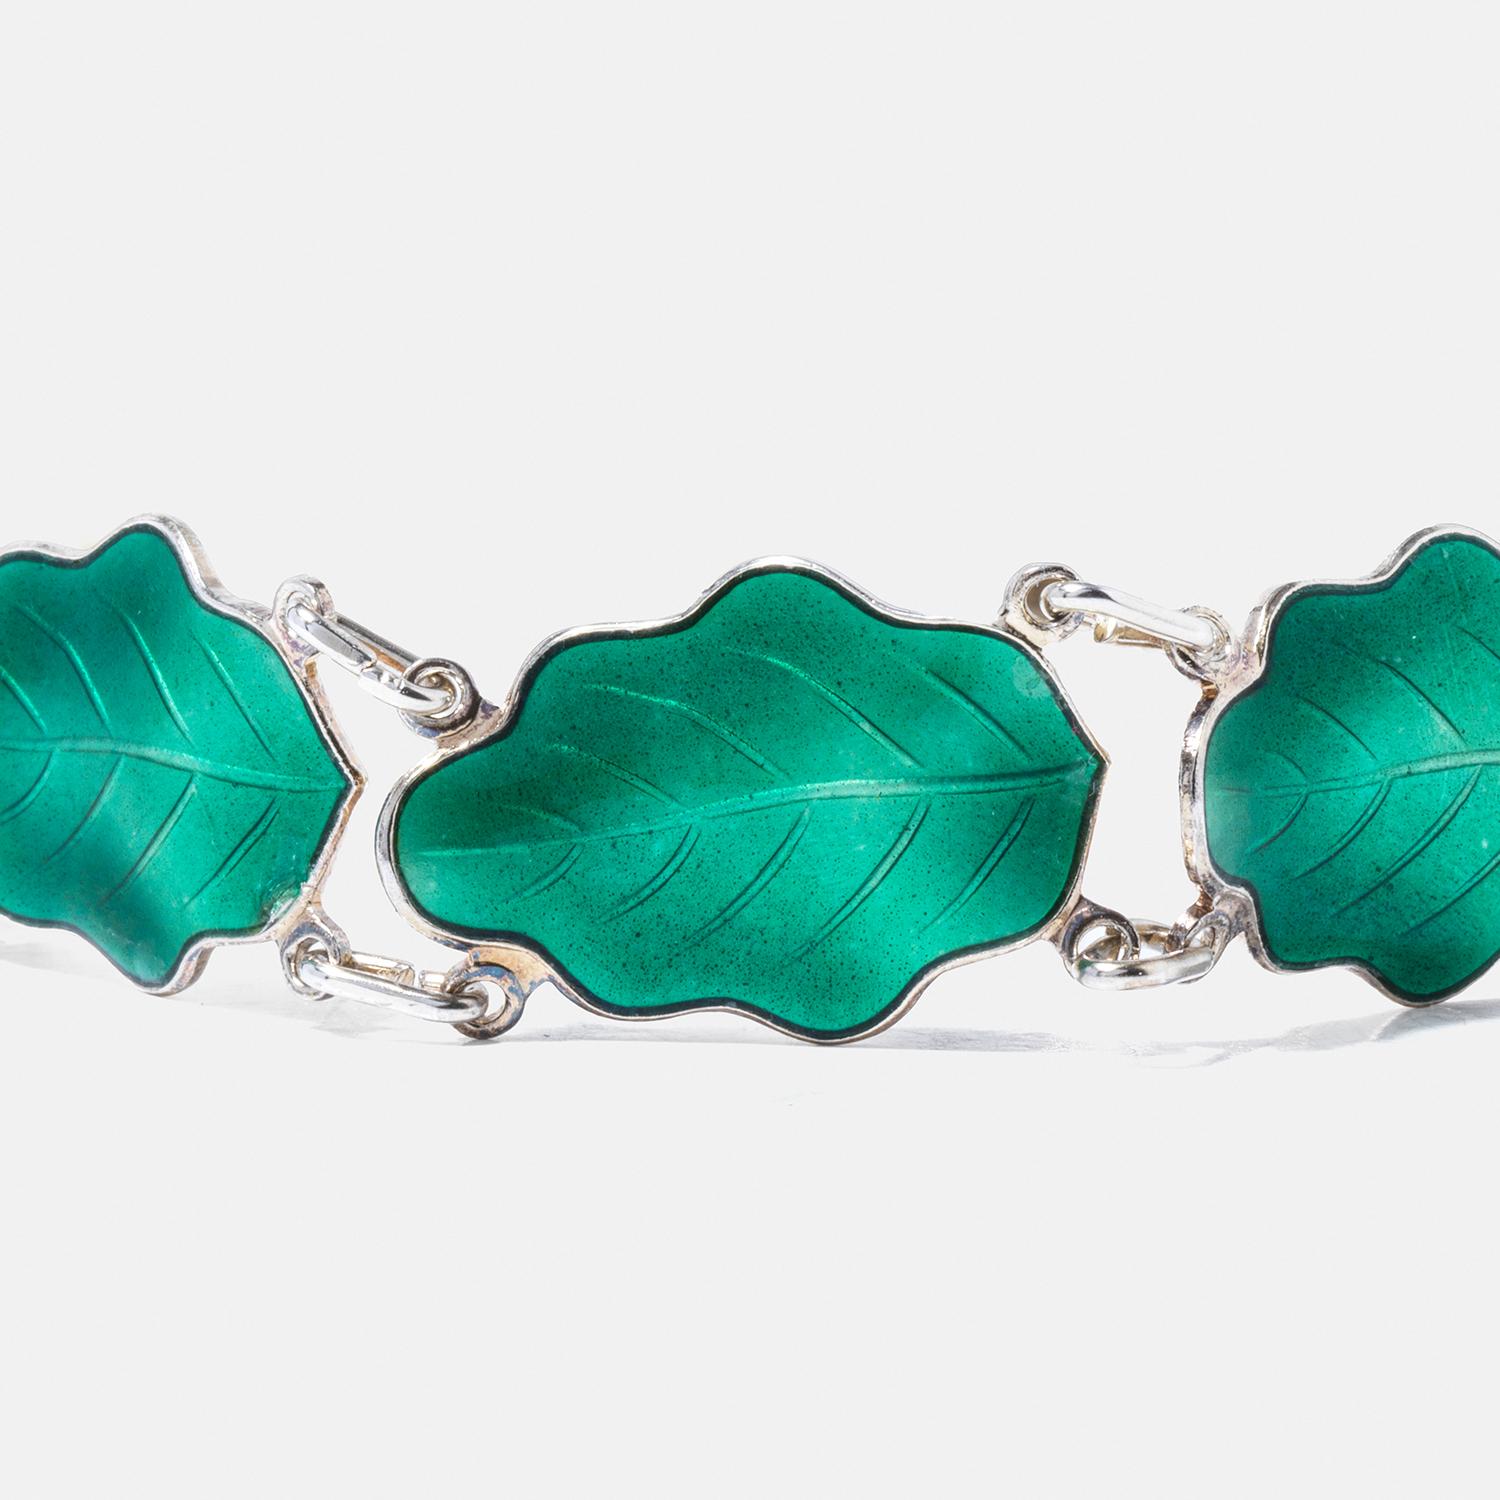 Vintage Norwegian Silver and Enamel Bracelet Made in 1950s In Good Condition For Sale In Stockholm, SE